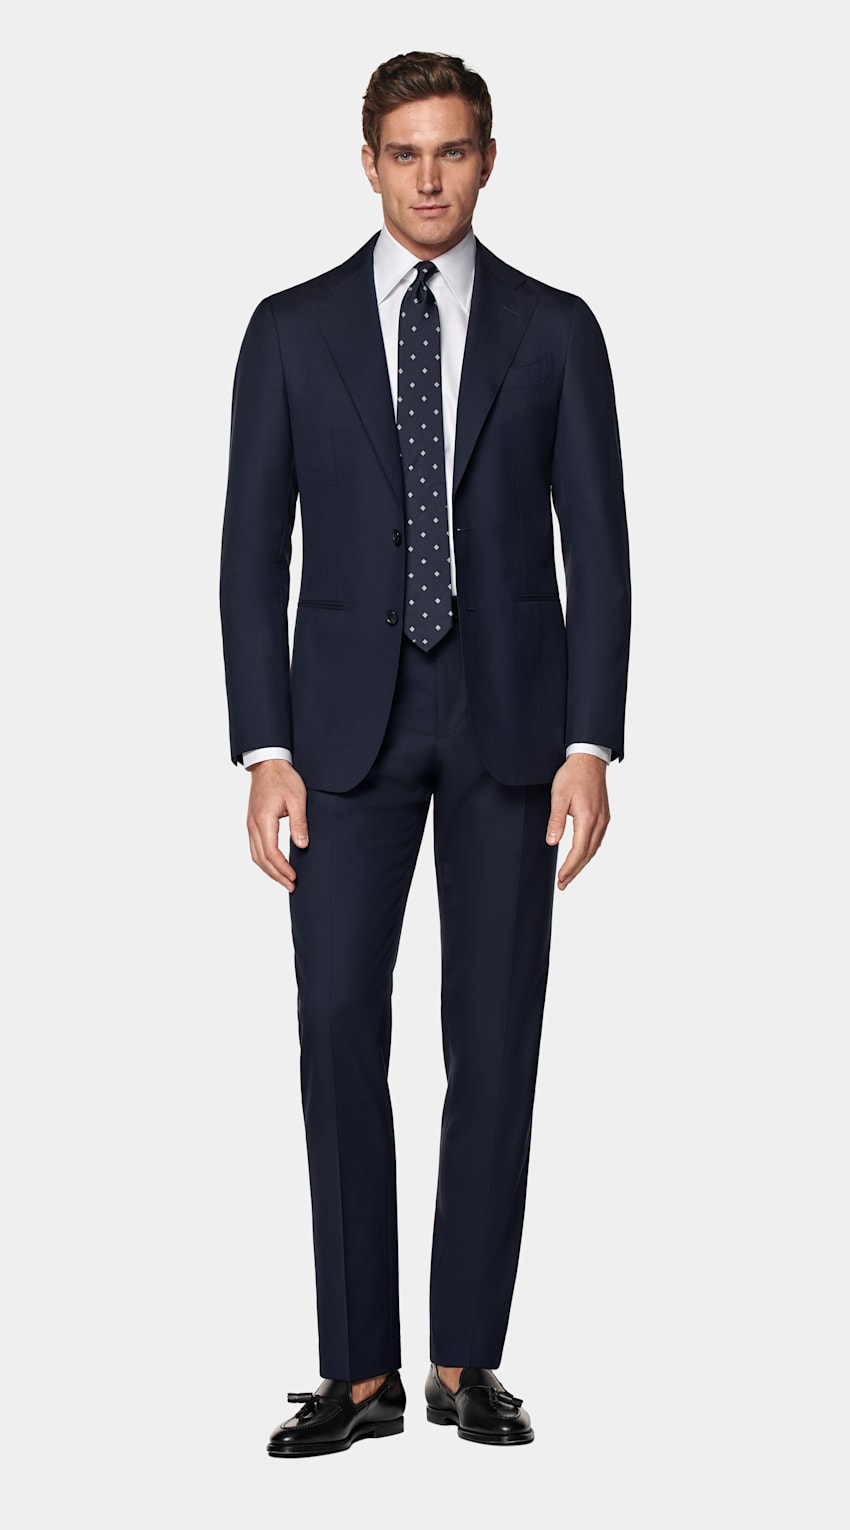 SUITSUPPLY All Season Pure S120's Tropical Wool by Vitale Barberis Canonico, Italy Navy Custom Made Suit